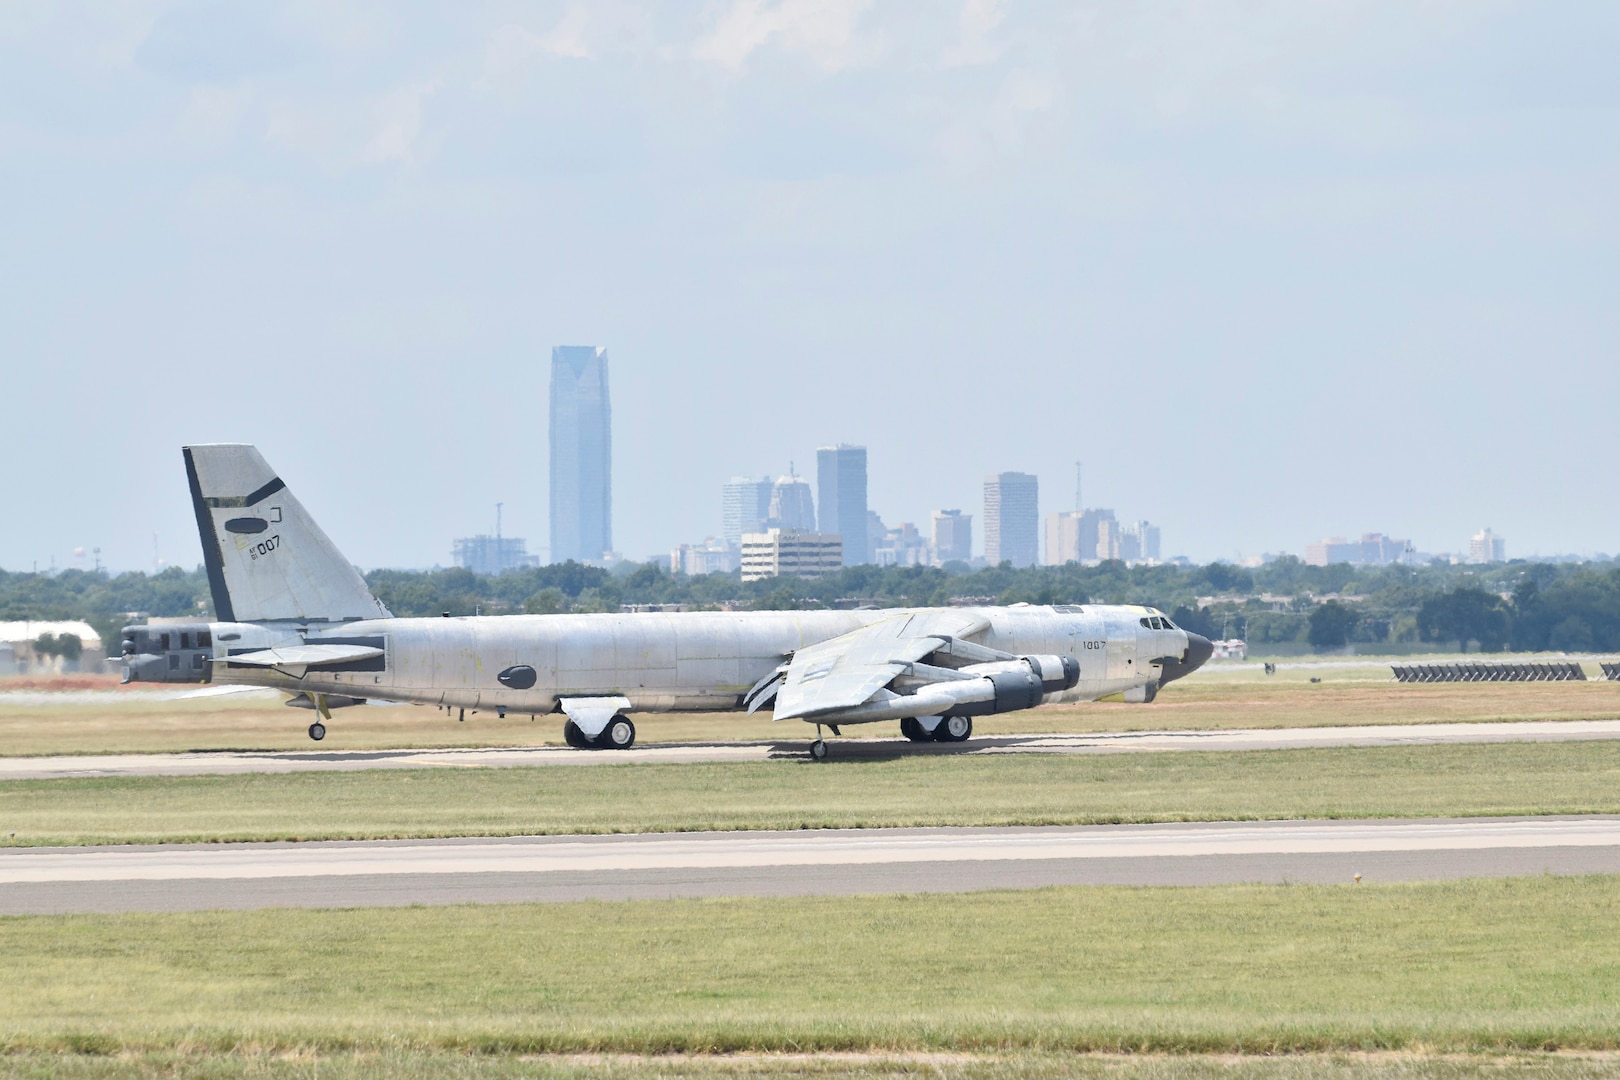 B-52H, 61-0007, 'Ghost Rider,' taxis with the skyline of Oklahoma City visible in the background before an attempted functional test flight after undergoing a 19-month overhaul and upgrade by the Oklahoma City Air Logistics Complex, Aug. 29, 2016, Tinker Air Force Base, Okla. 'Ghost Rider' is shown in natural metal since it has been overhauled and must be checked for full functionality before being painted. 61-0007 is the first B-52H to ever be regenerated from long-term storage with the 309th Aerospace Maintenance and Regeneration Group at Davis-Monthan AFB, Ariz., and returned to fully-operational flying status. (U.S. Air Force photo/Greg L. Davis)